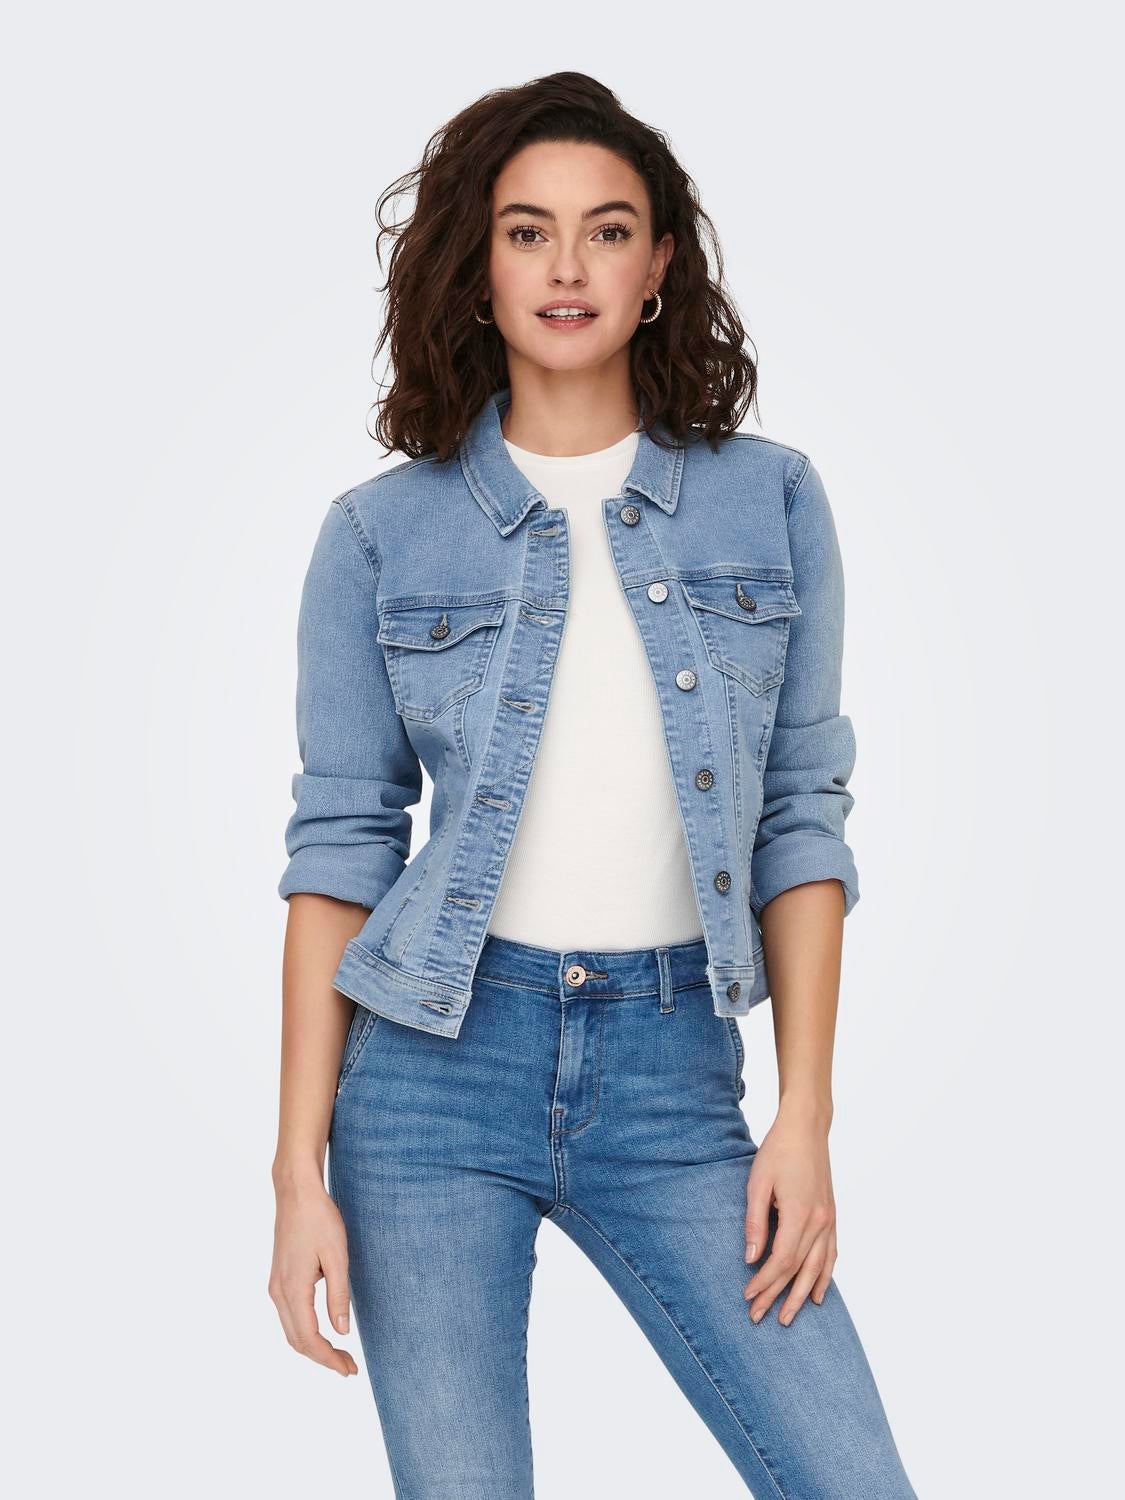 Buy SS7 Womens Fitted Denim Jackets Mid Blue, Mid Blue, 14 at Amazon.in